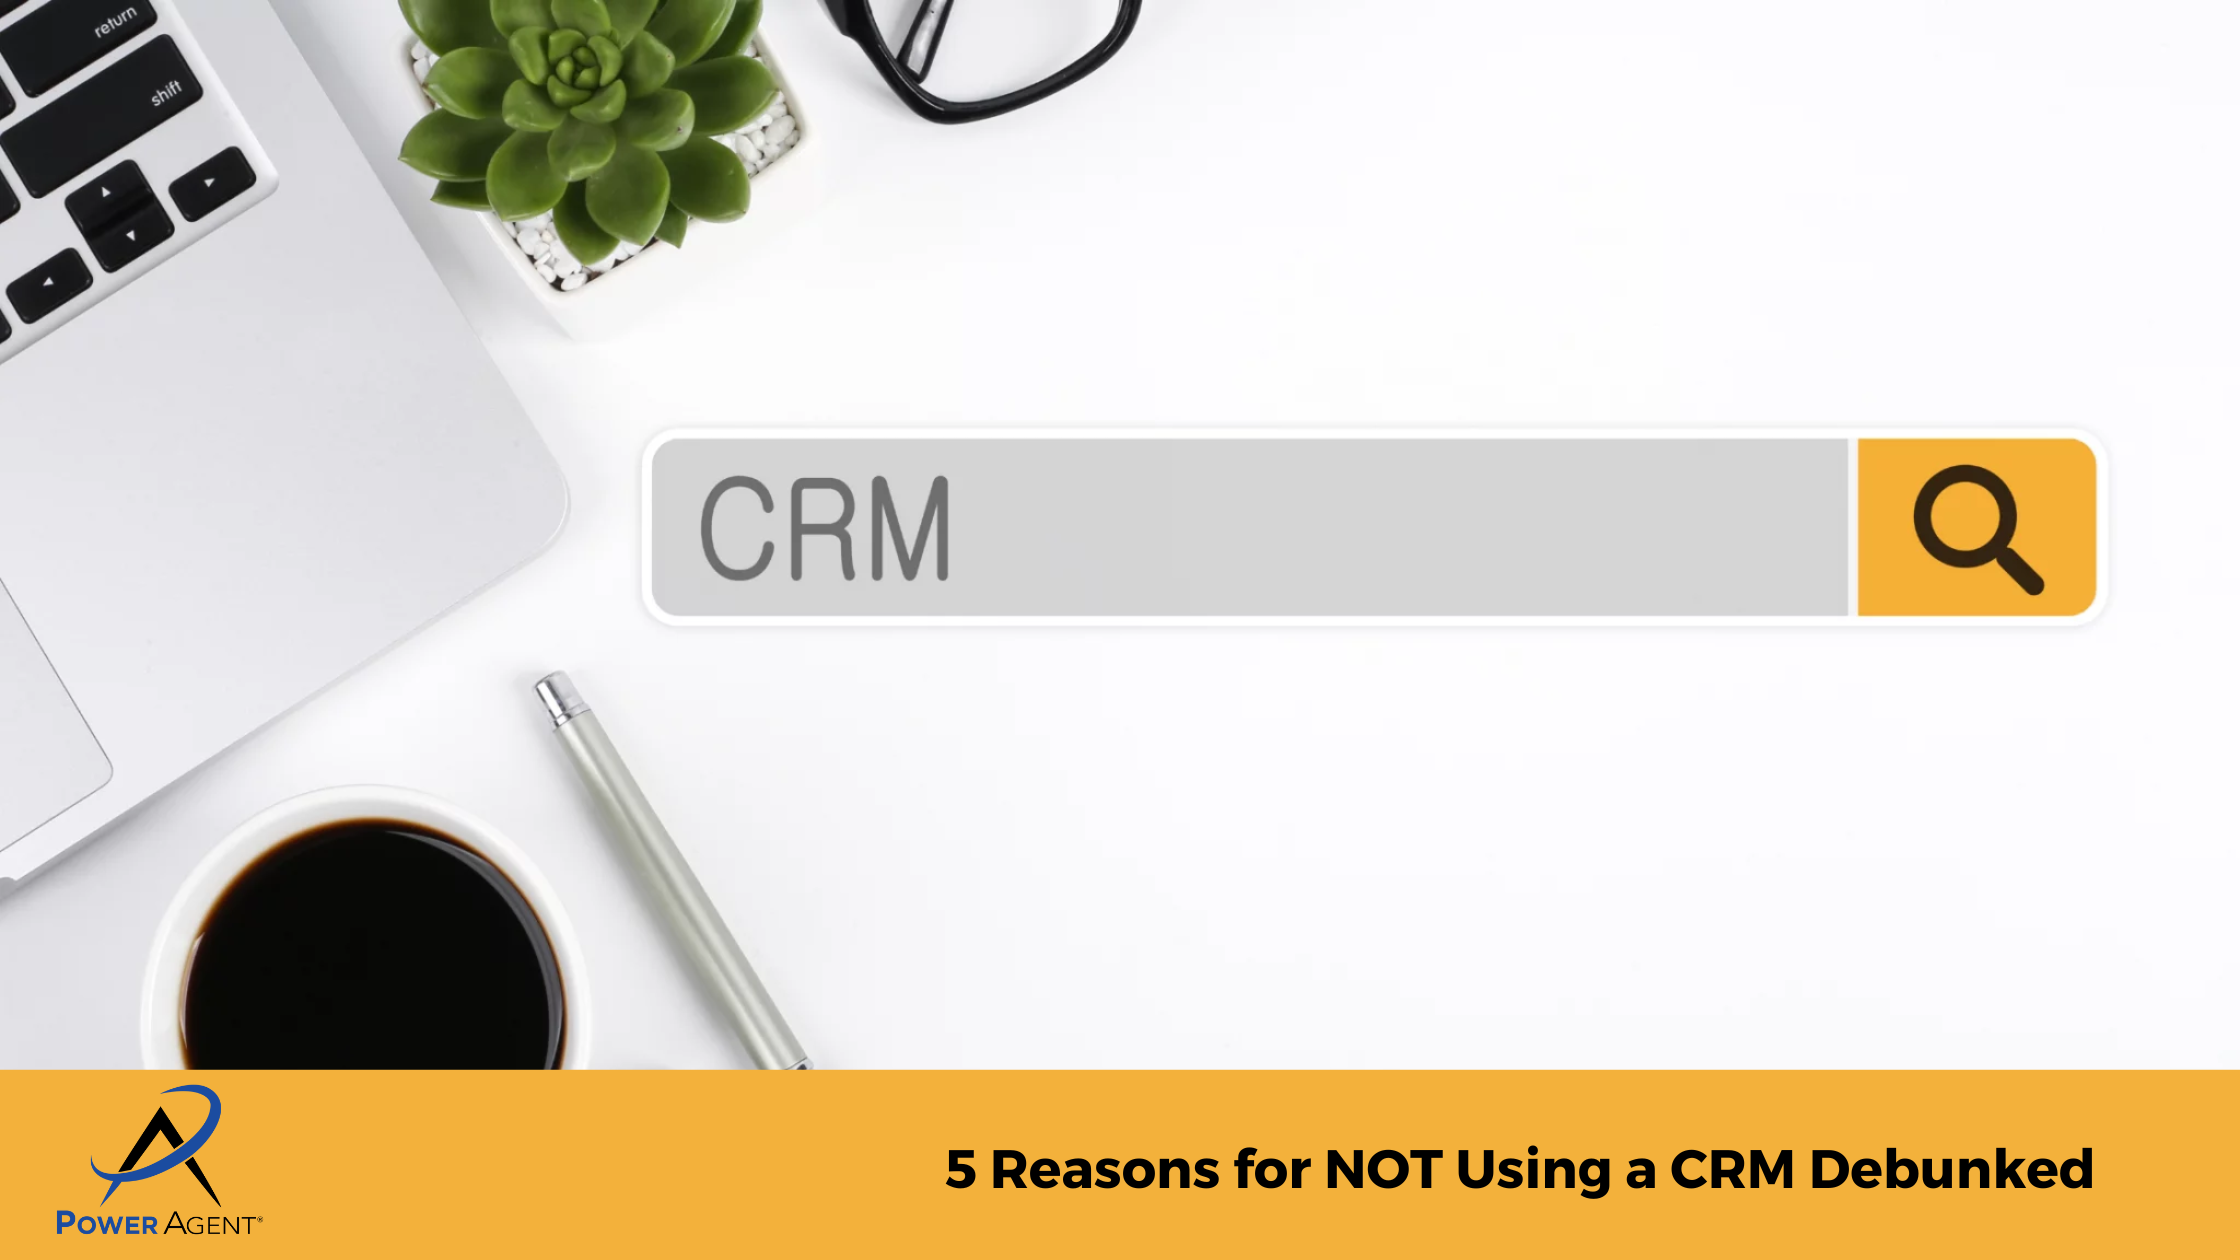 5 Reasons for NOT Using a CRM Debunked